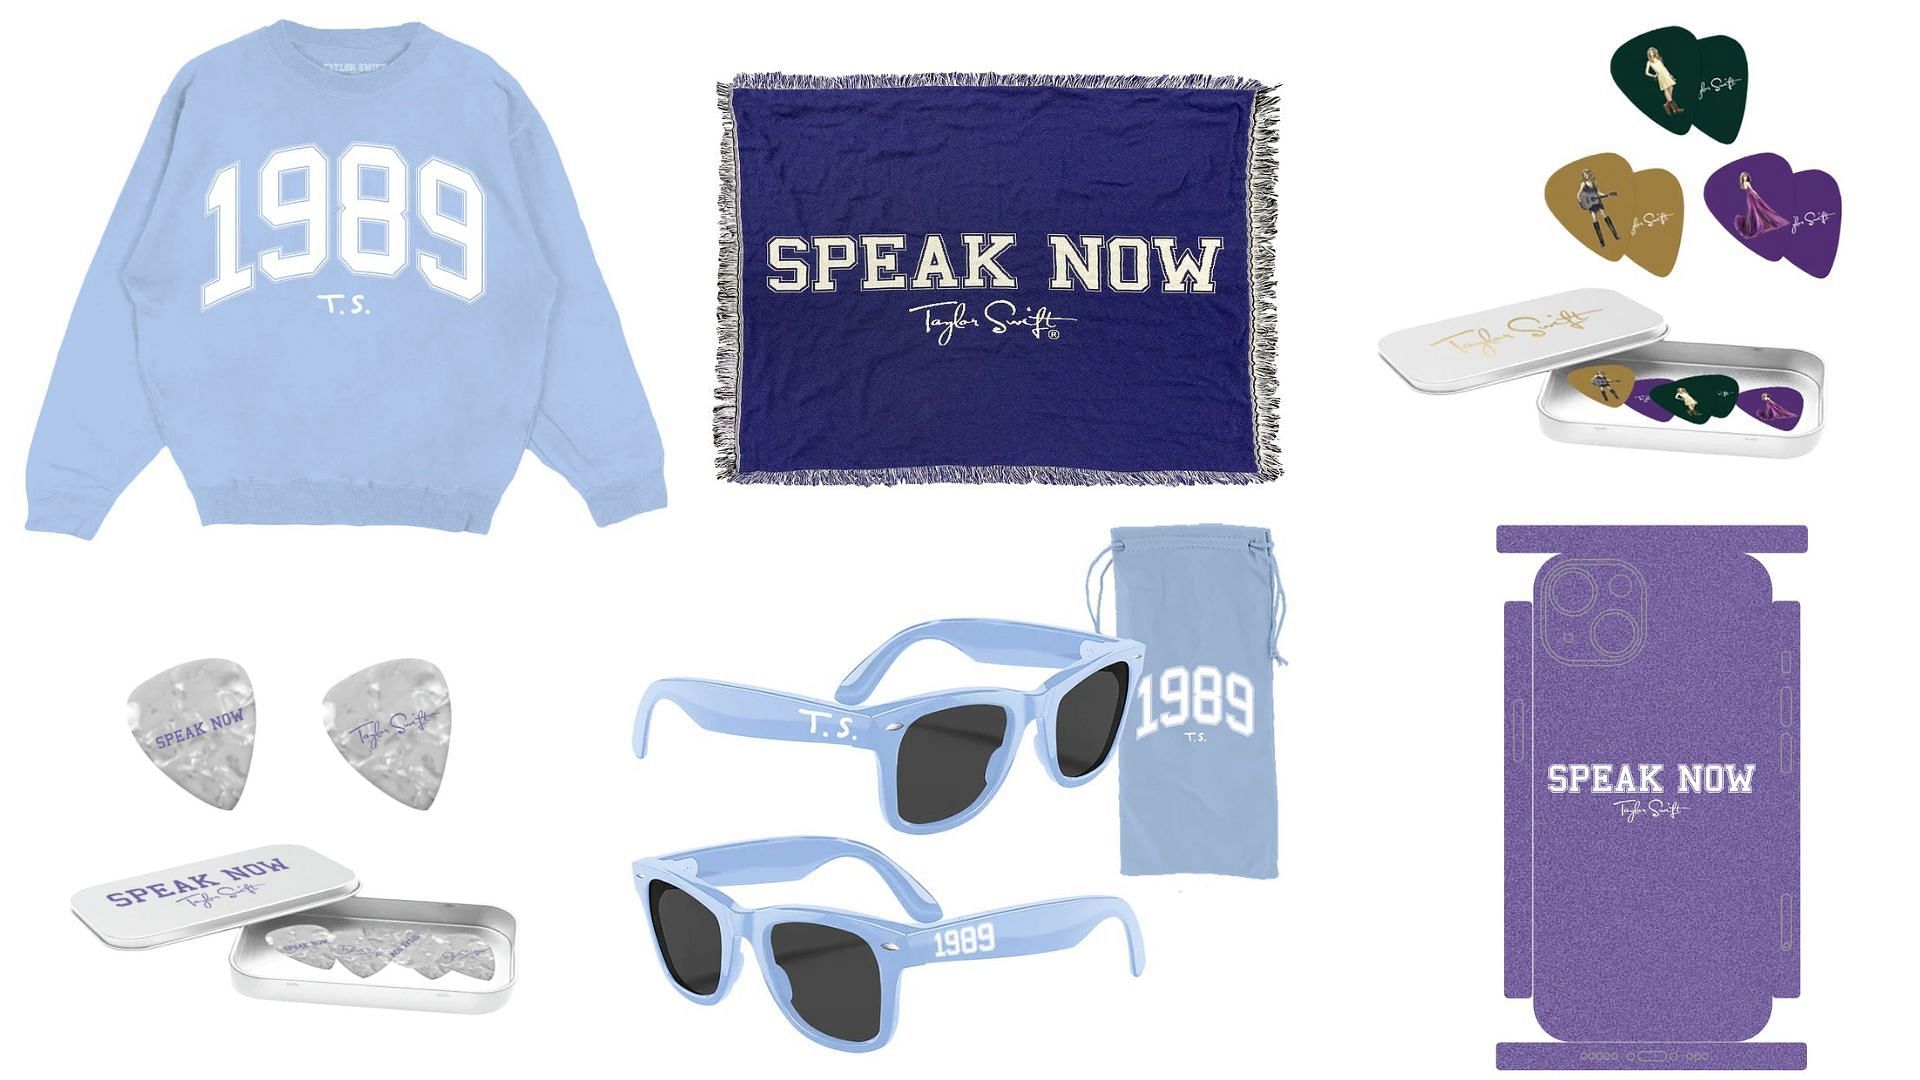 Taylor Swift launched her surprise collection celebrating her 1989 and Speak Now albums (Image via Sportskeeda)